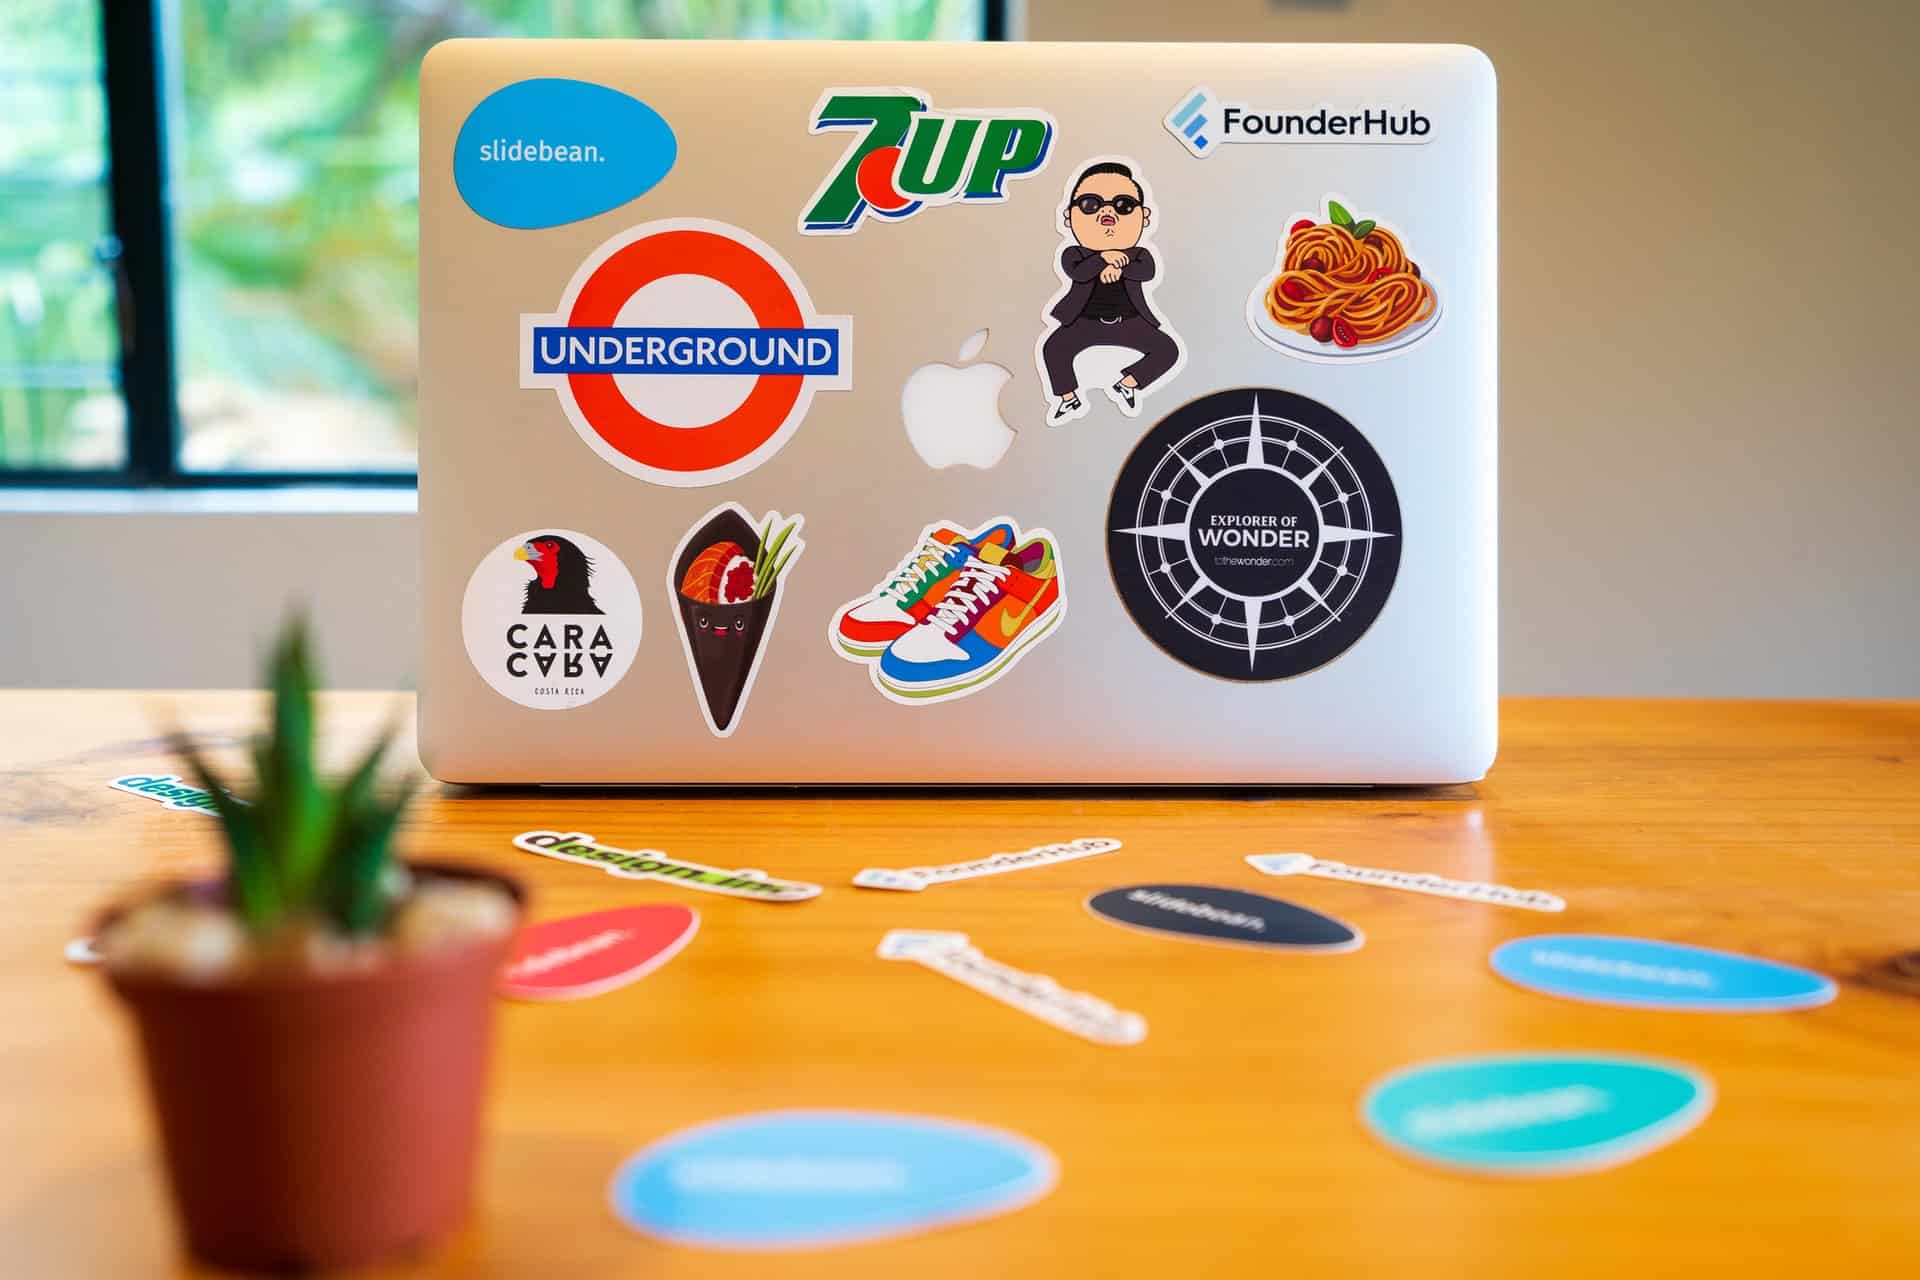 A photo shows the back of the laptop with different brands' stickers. Underground, 7up, FounderHub, etc.